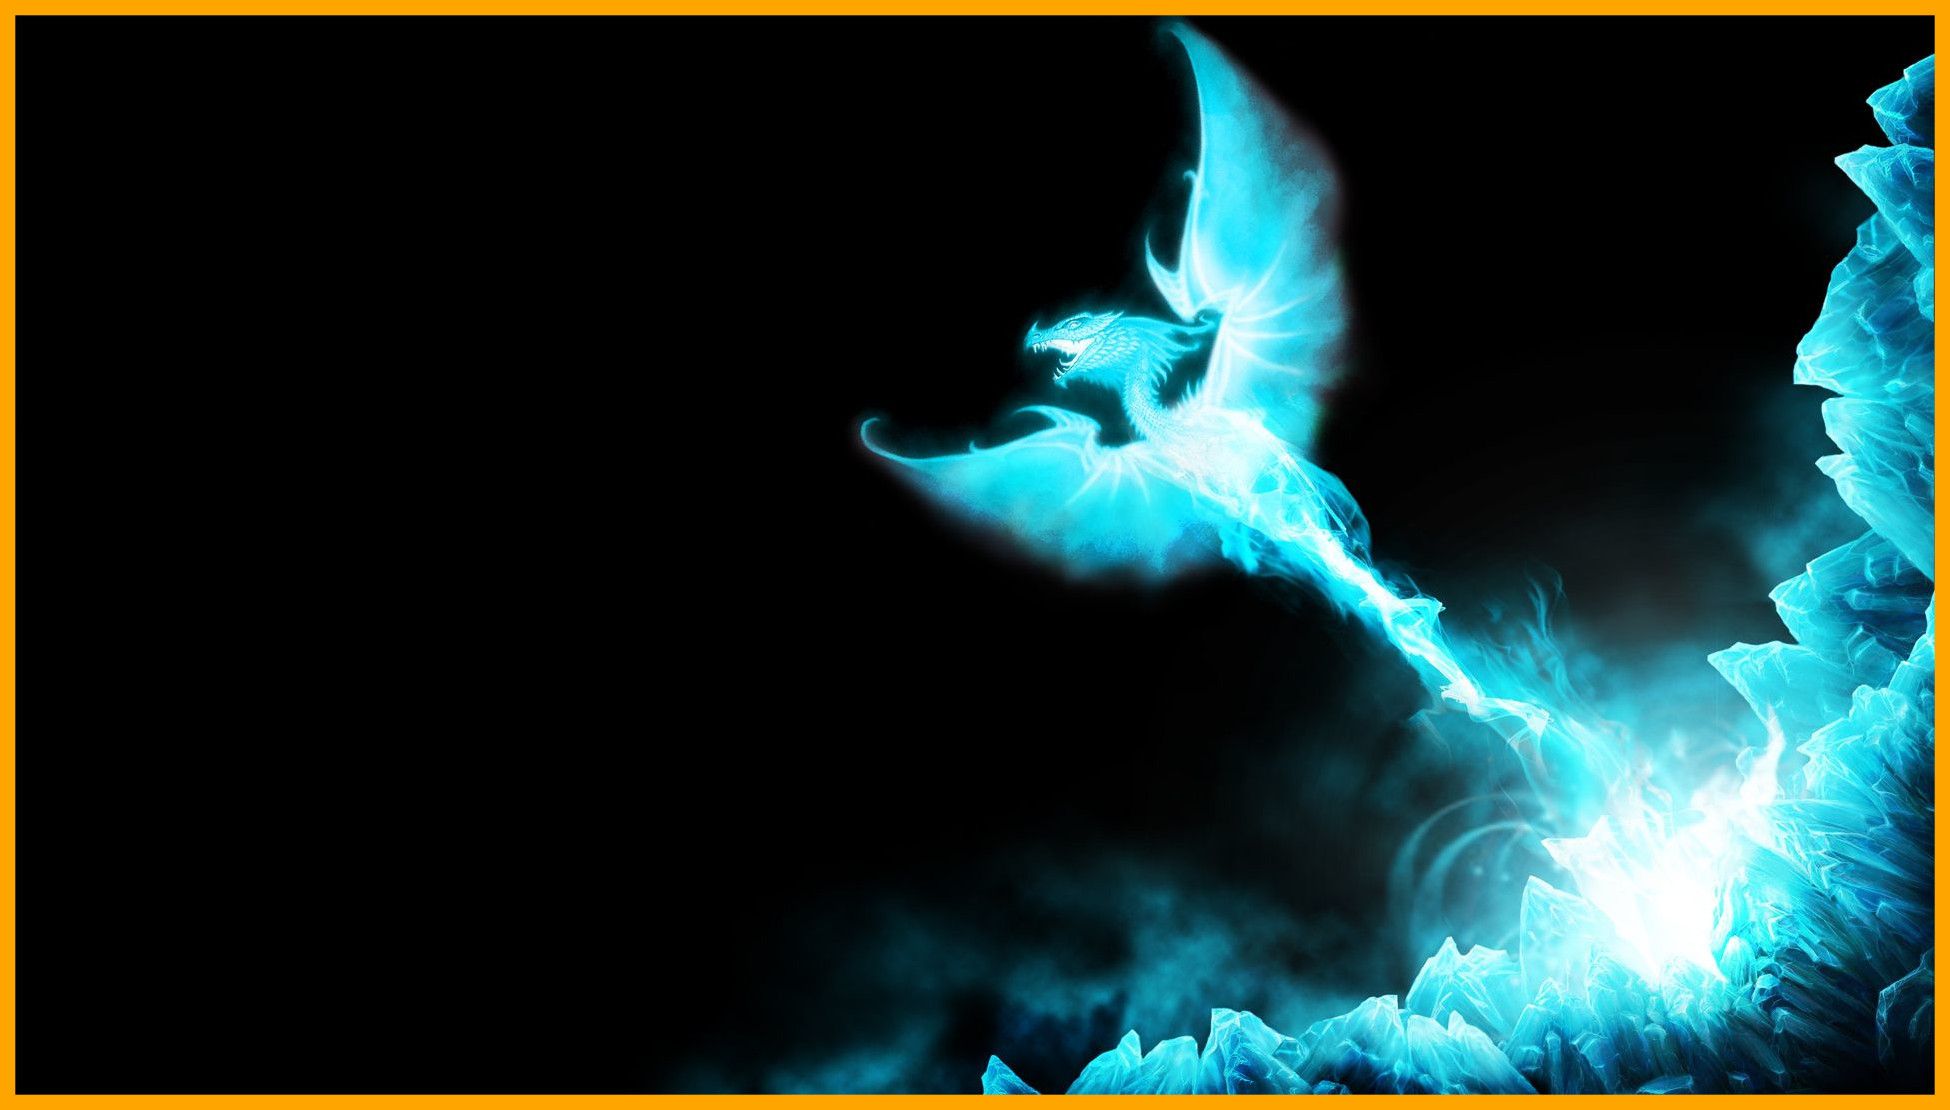 Blue Neon Dragon Wallpapers - Wallpaper Cave